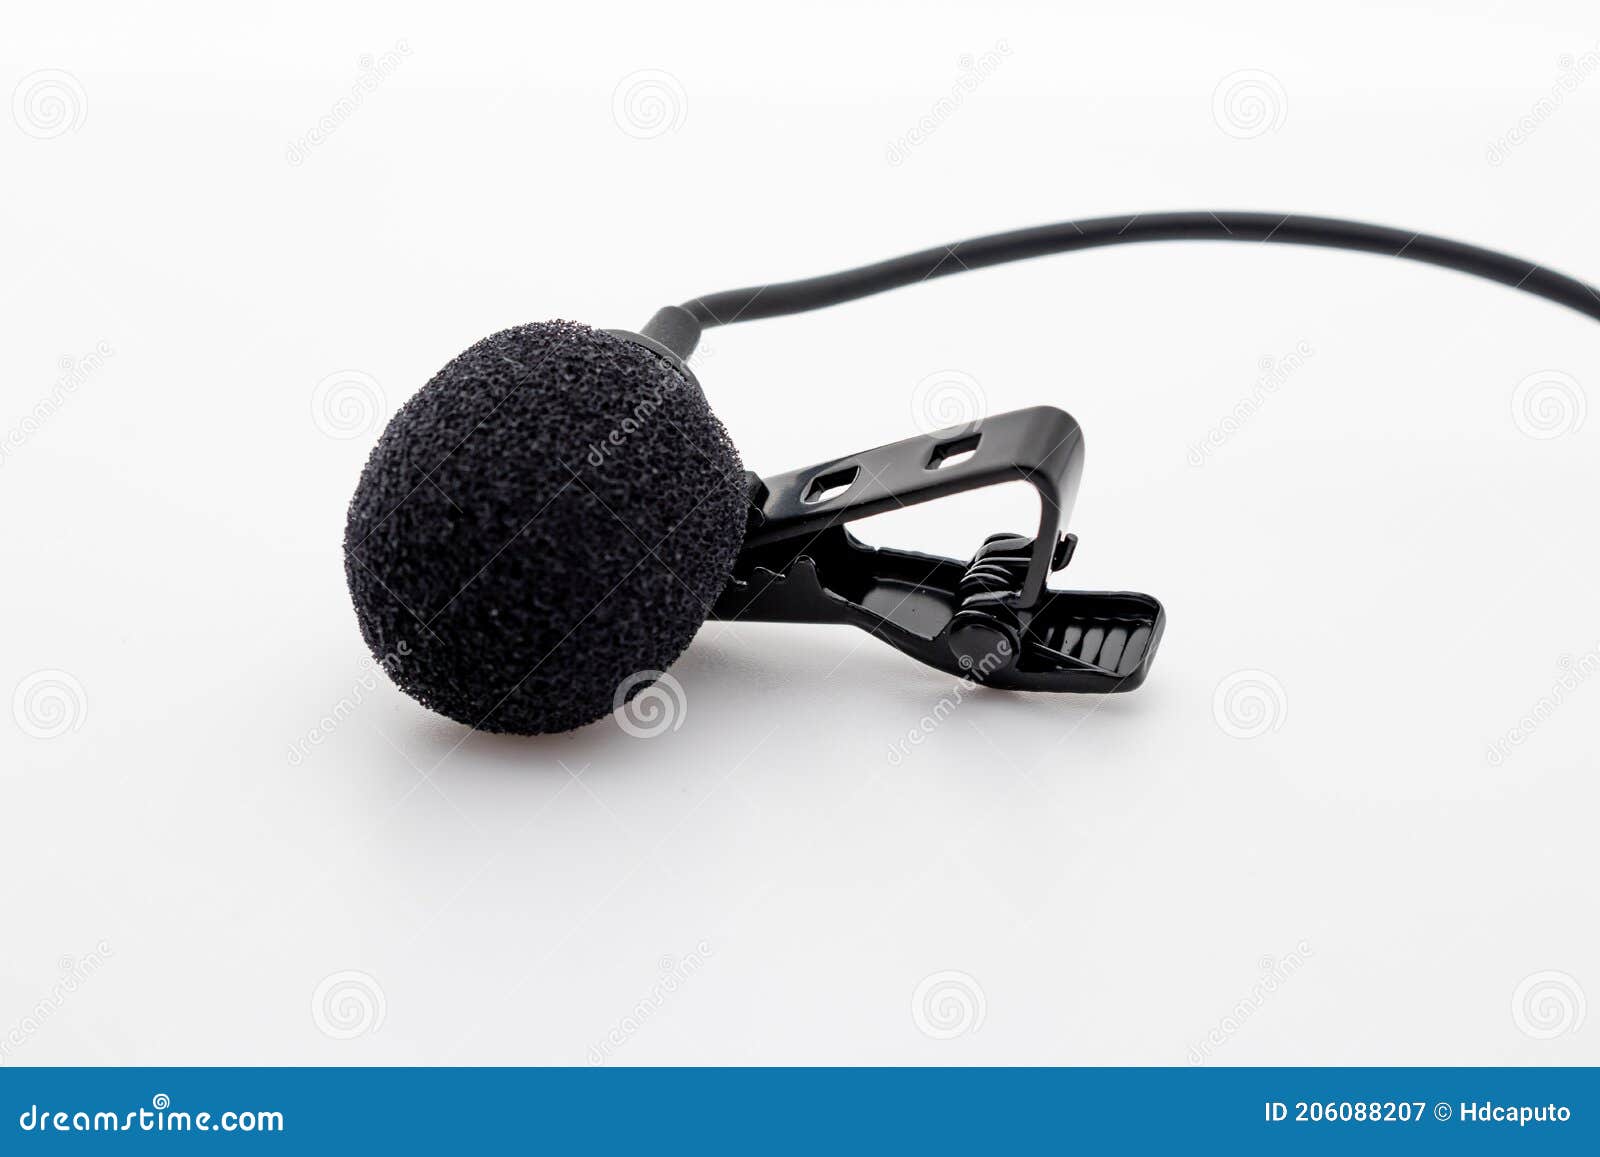 lavalier or lapel microphone on a white surface, very close-up. the details of the grip clip or bra and the sponge against the